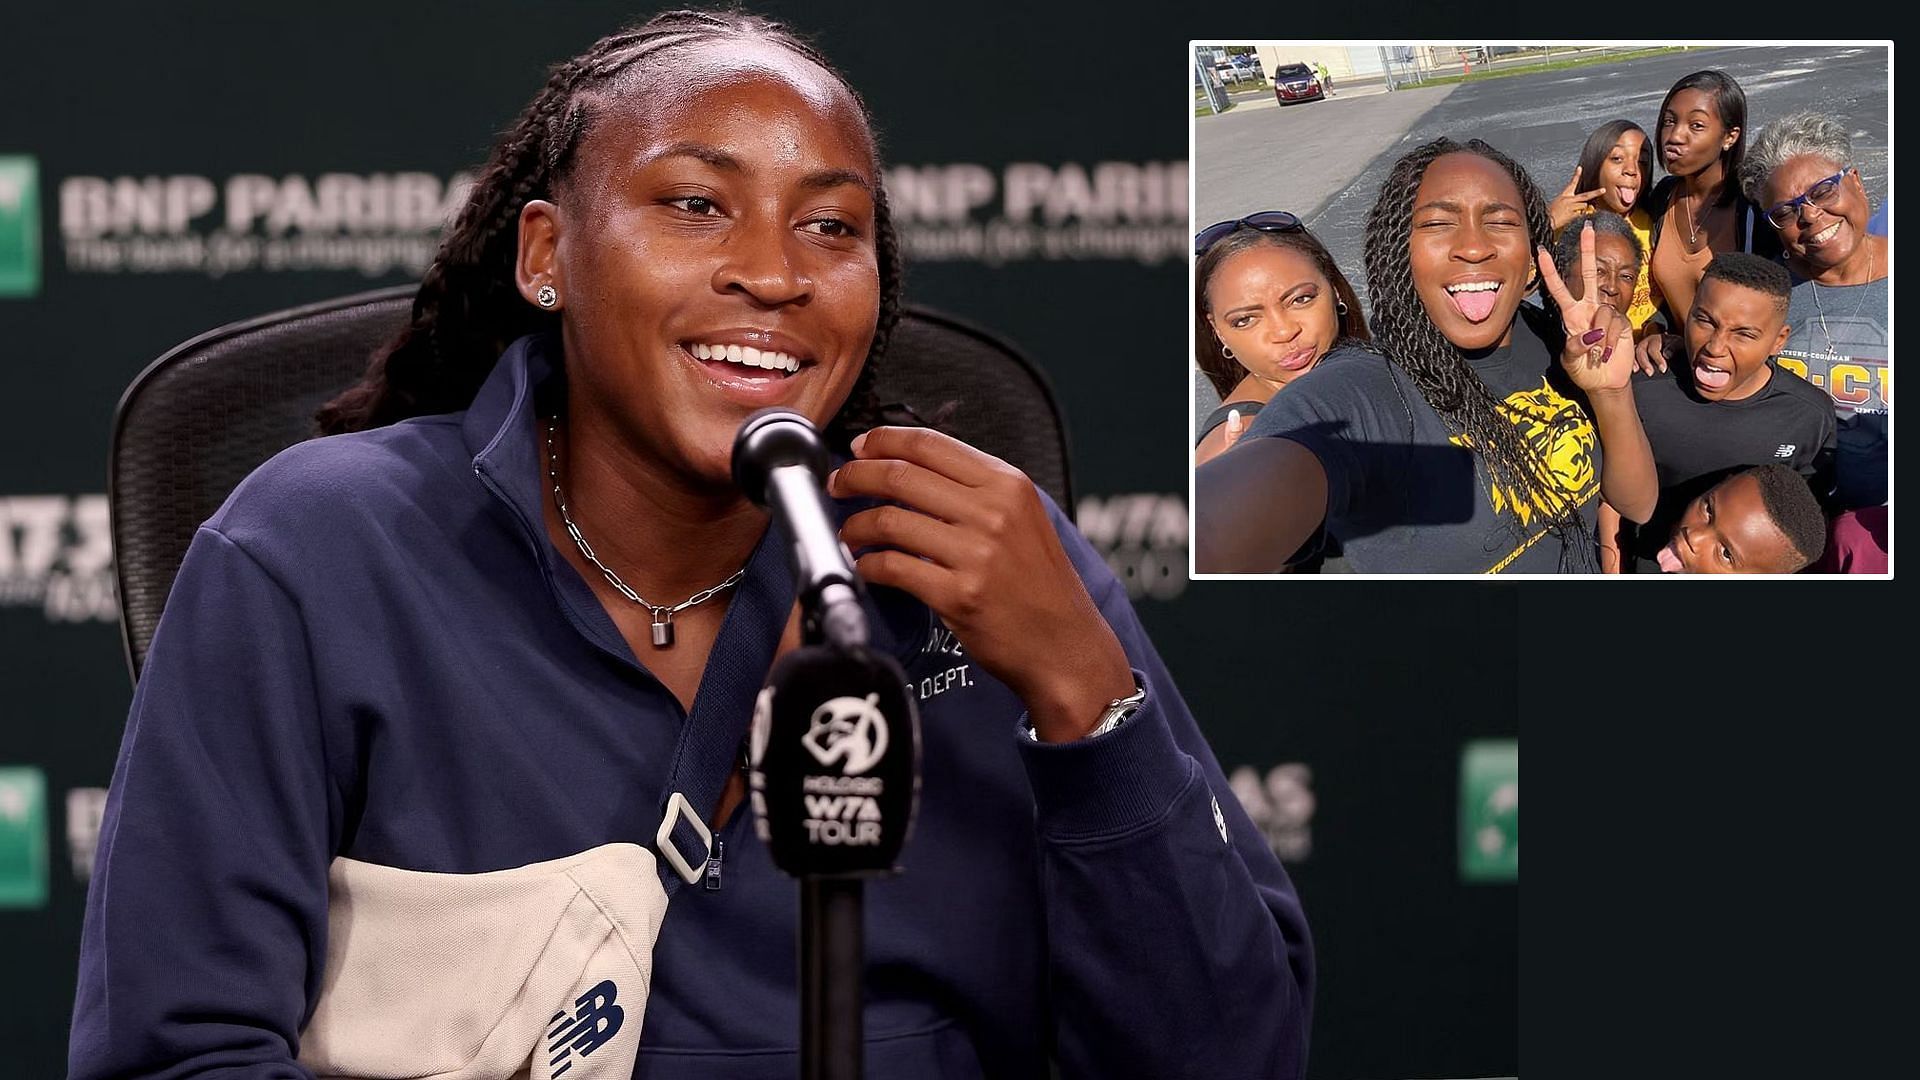 Coco Gauff turned 20 years old on Wednesday, March 13.